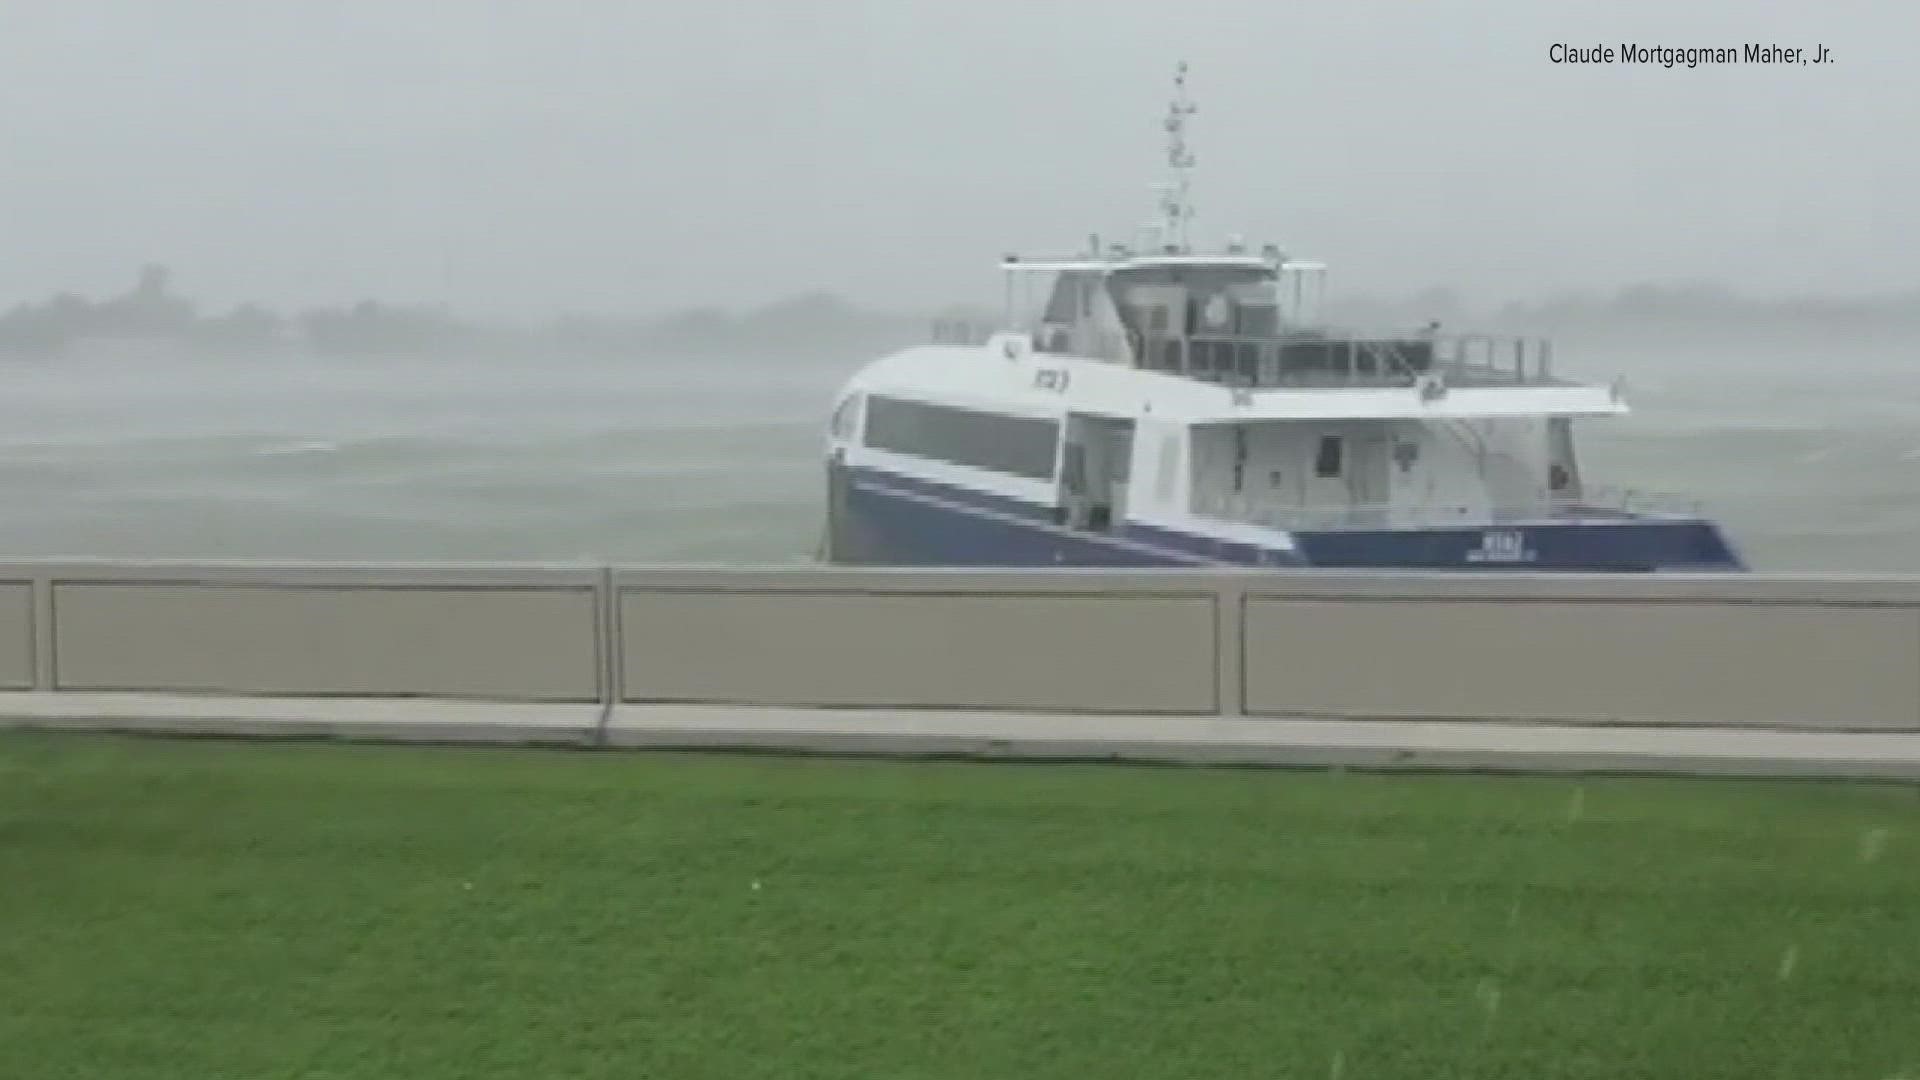 "There is nothing to be done at this moment, but obviously we’ve got a ferry in the wind,"